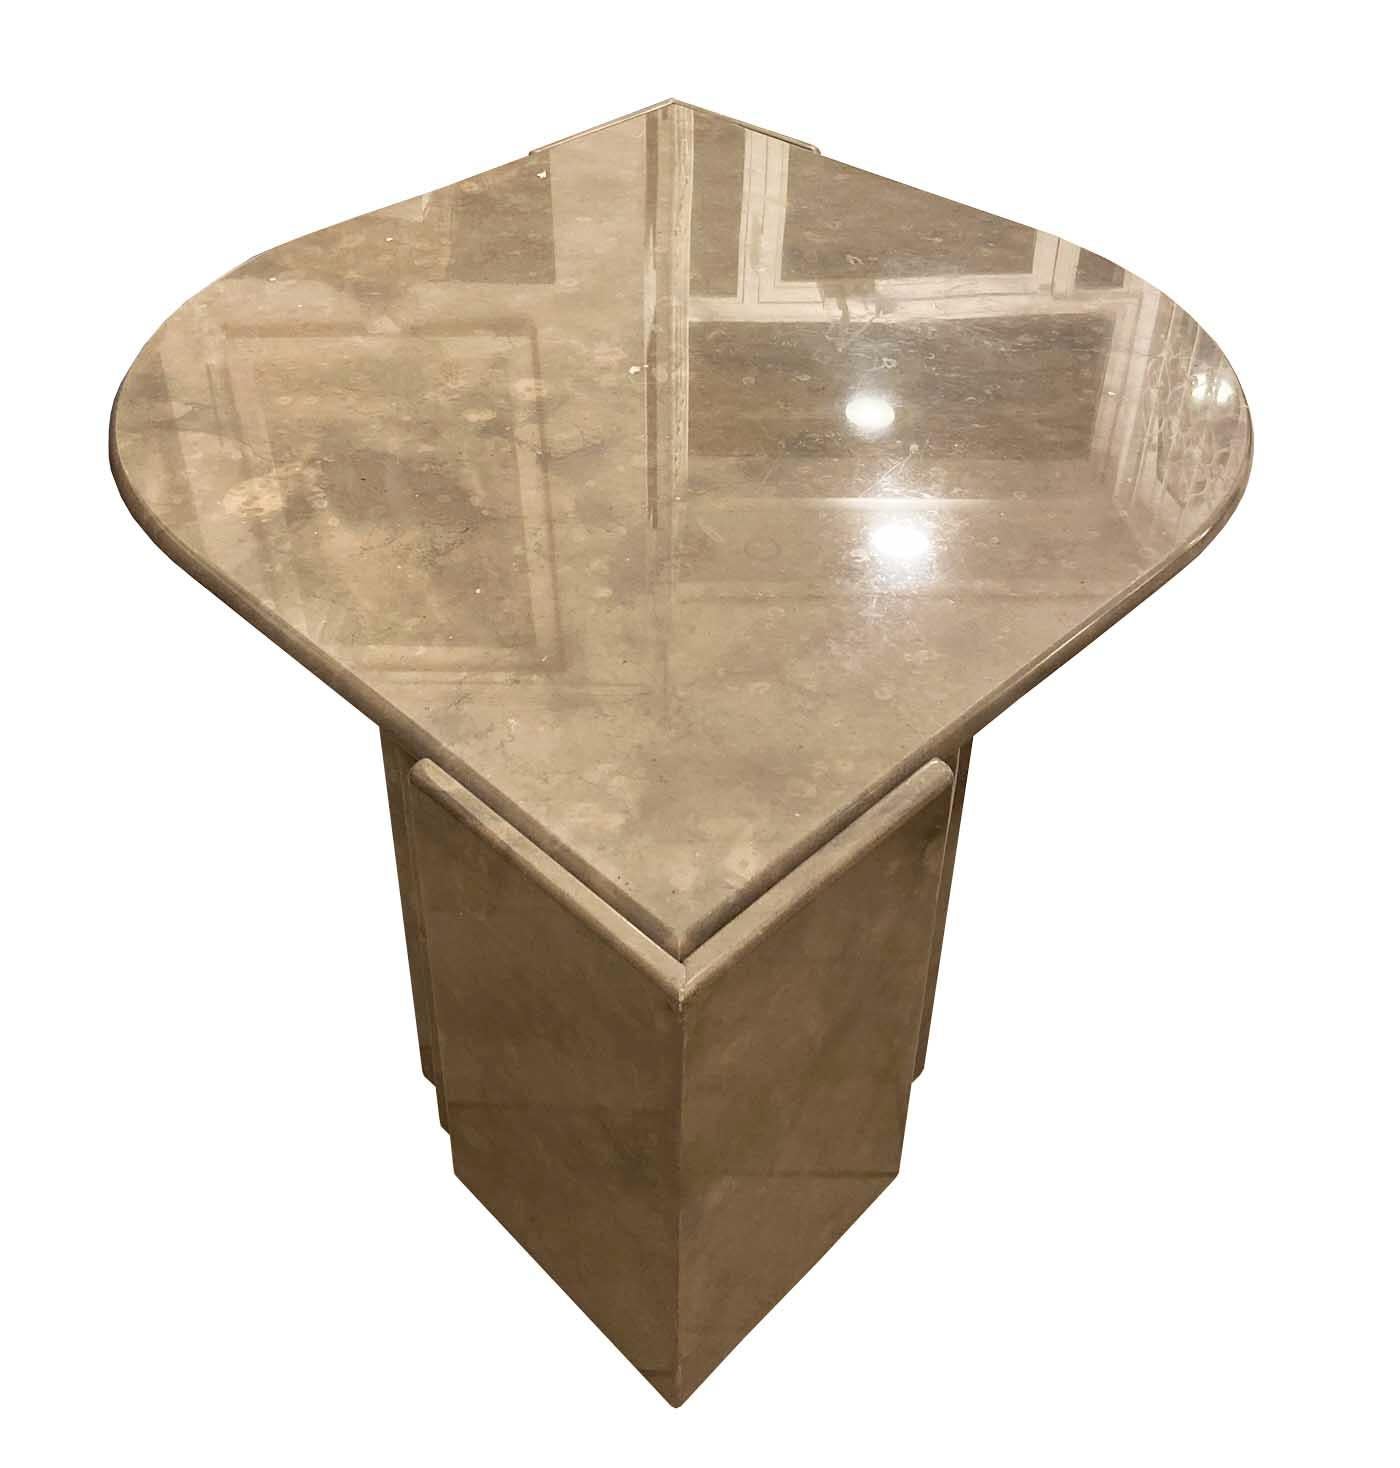 Italian marble 1970s coffee table in good condition.
Beautiful cream, beige and pink marble.
The heavy eye-shaped top rests on two triangles which are build up out of three layers of solid marble.
 